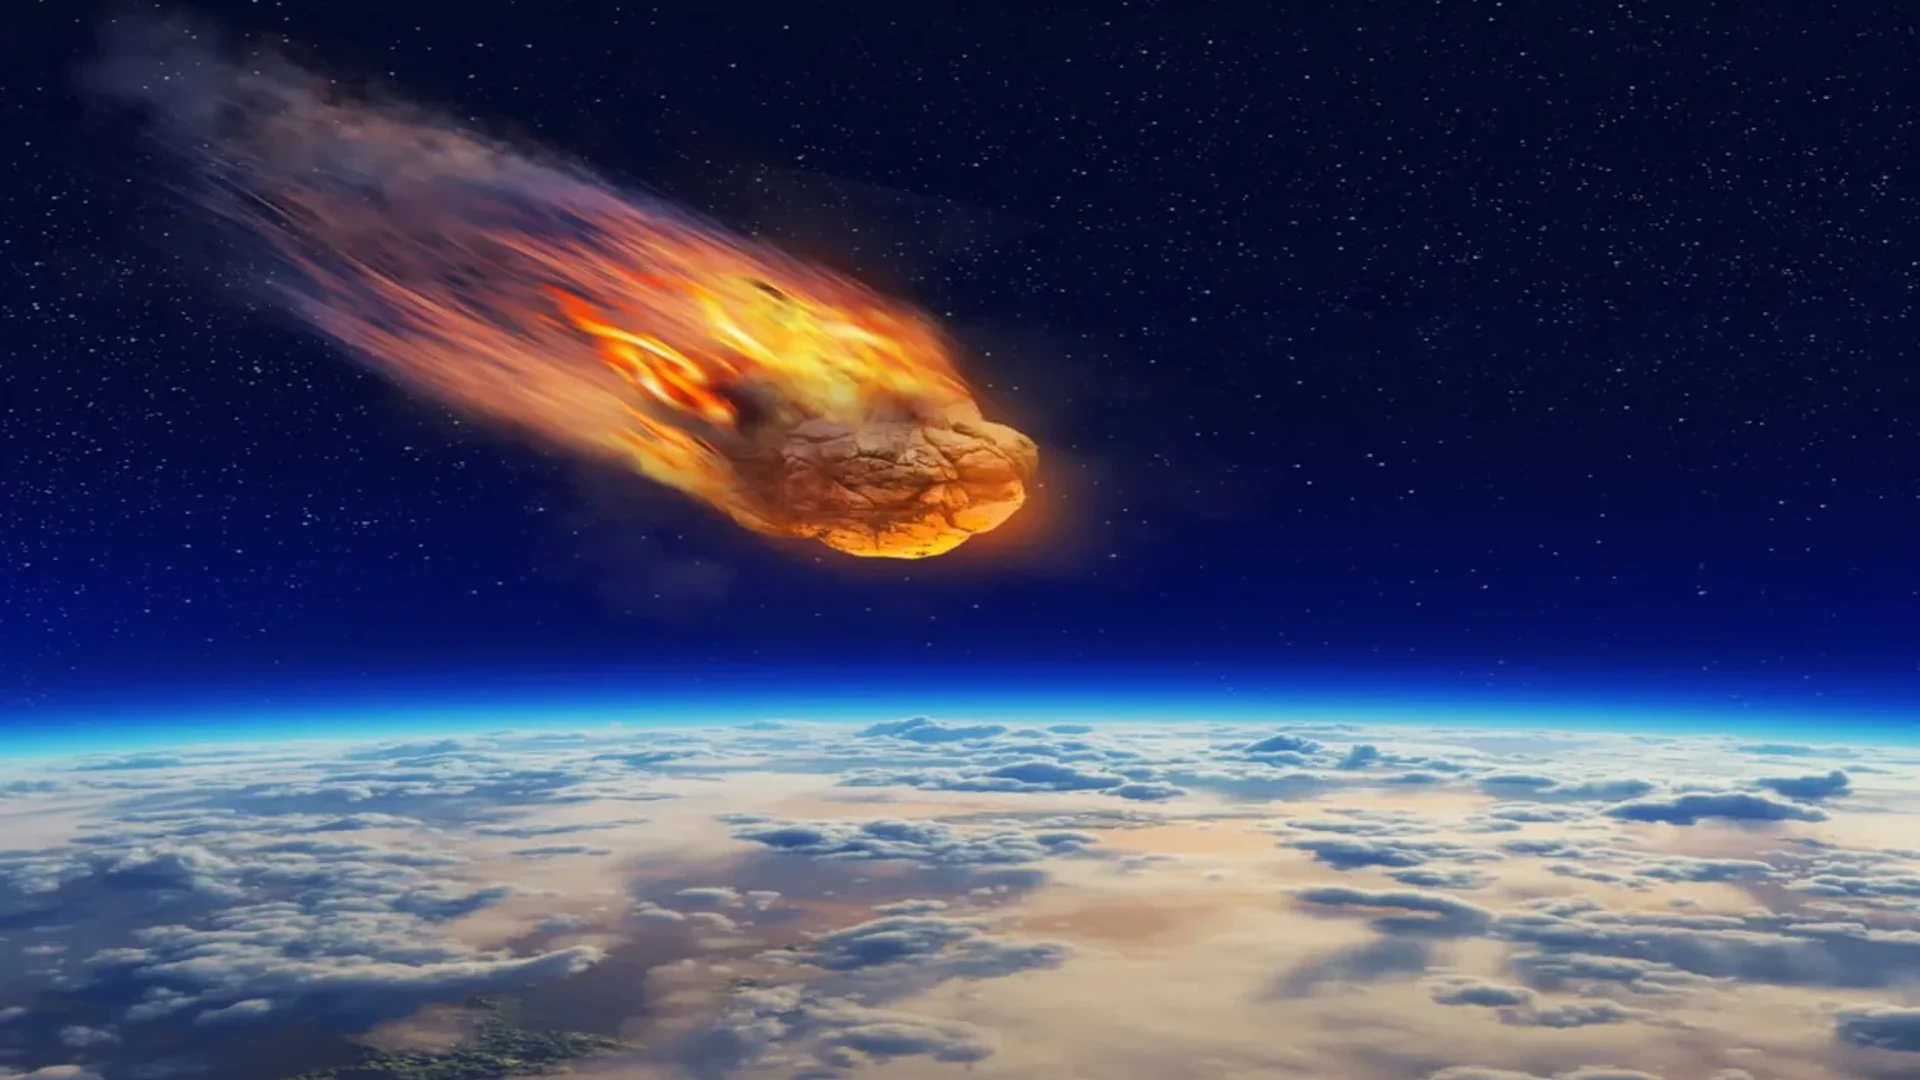 Scientists Believe That Gigantic Meteor Impacts Are Responsible for Earth’s Continents